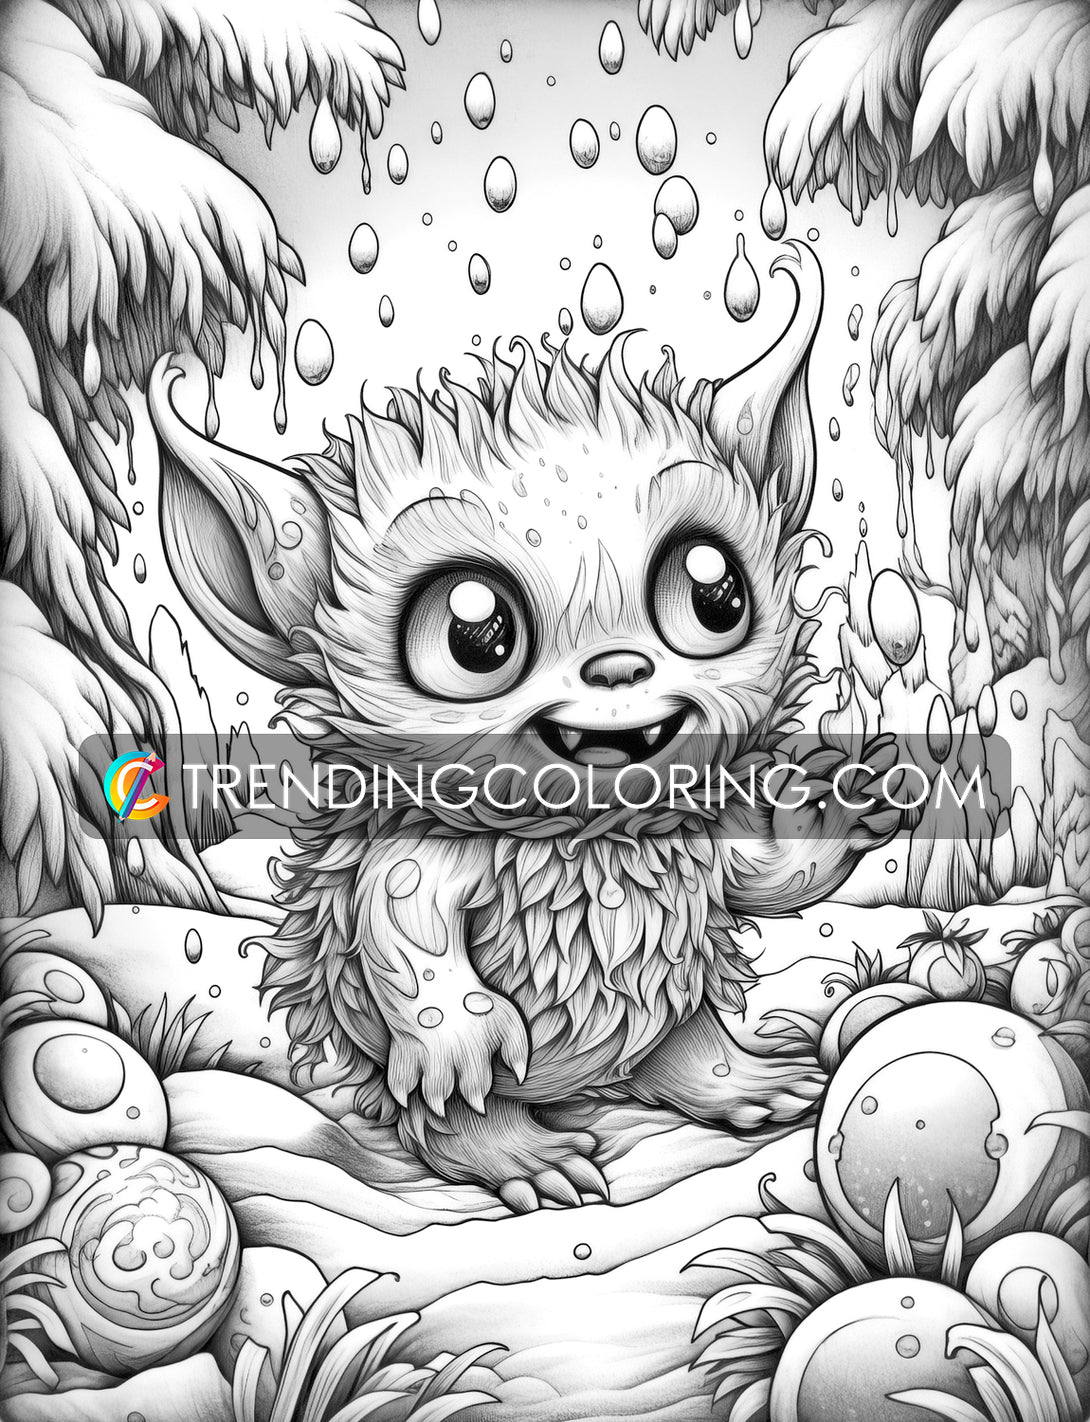 50 Adorable Creepy Monsters Coloring Book V2: for Adults and 